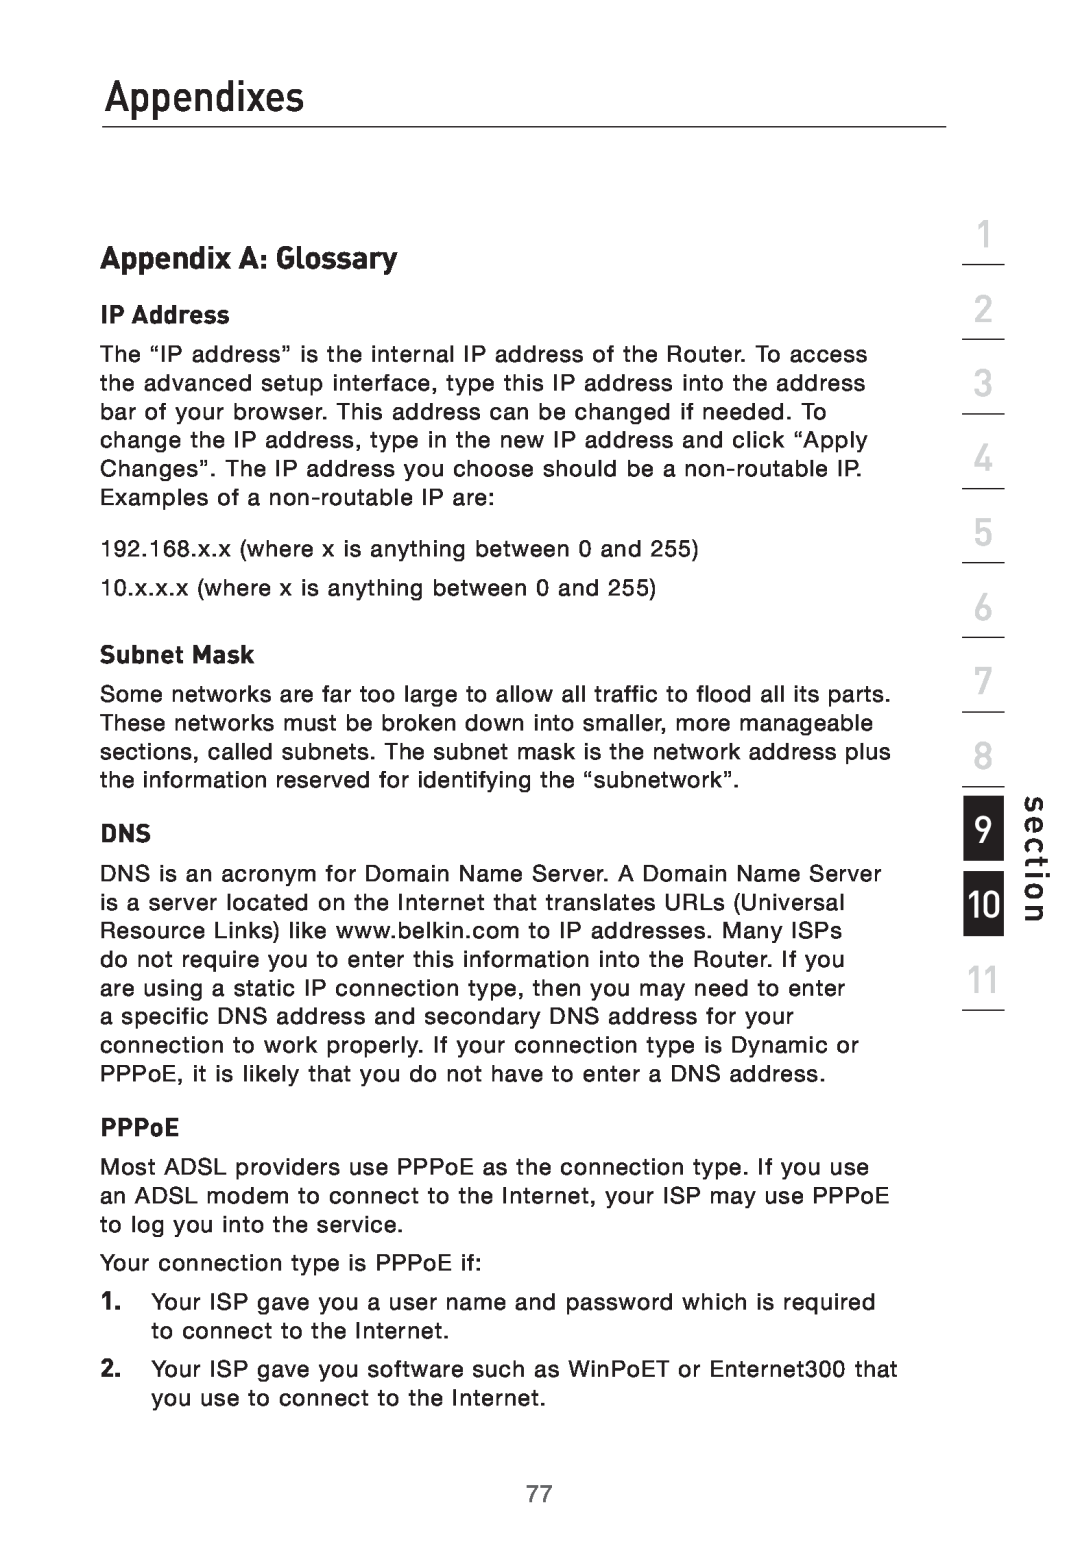 Belkin Pre-N manual Appendixes, Appendix A Glossary, IP Address, Subnet Mask, PPPoE, section 